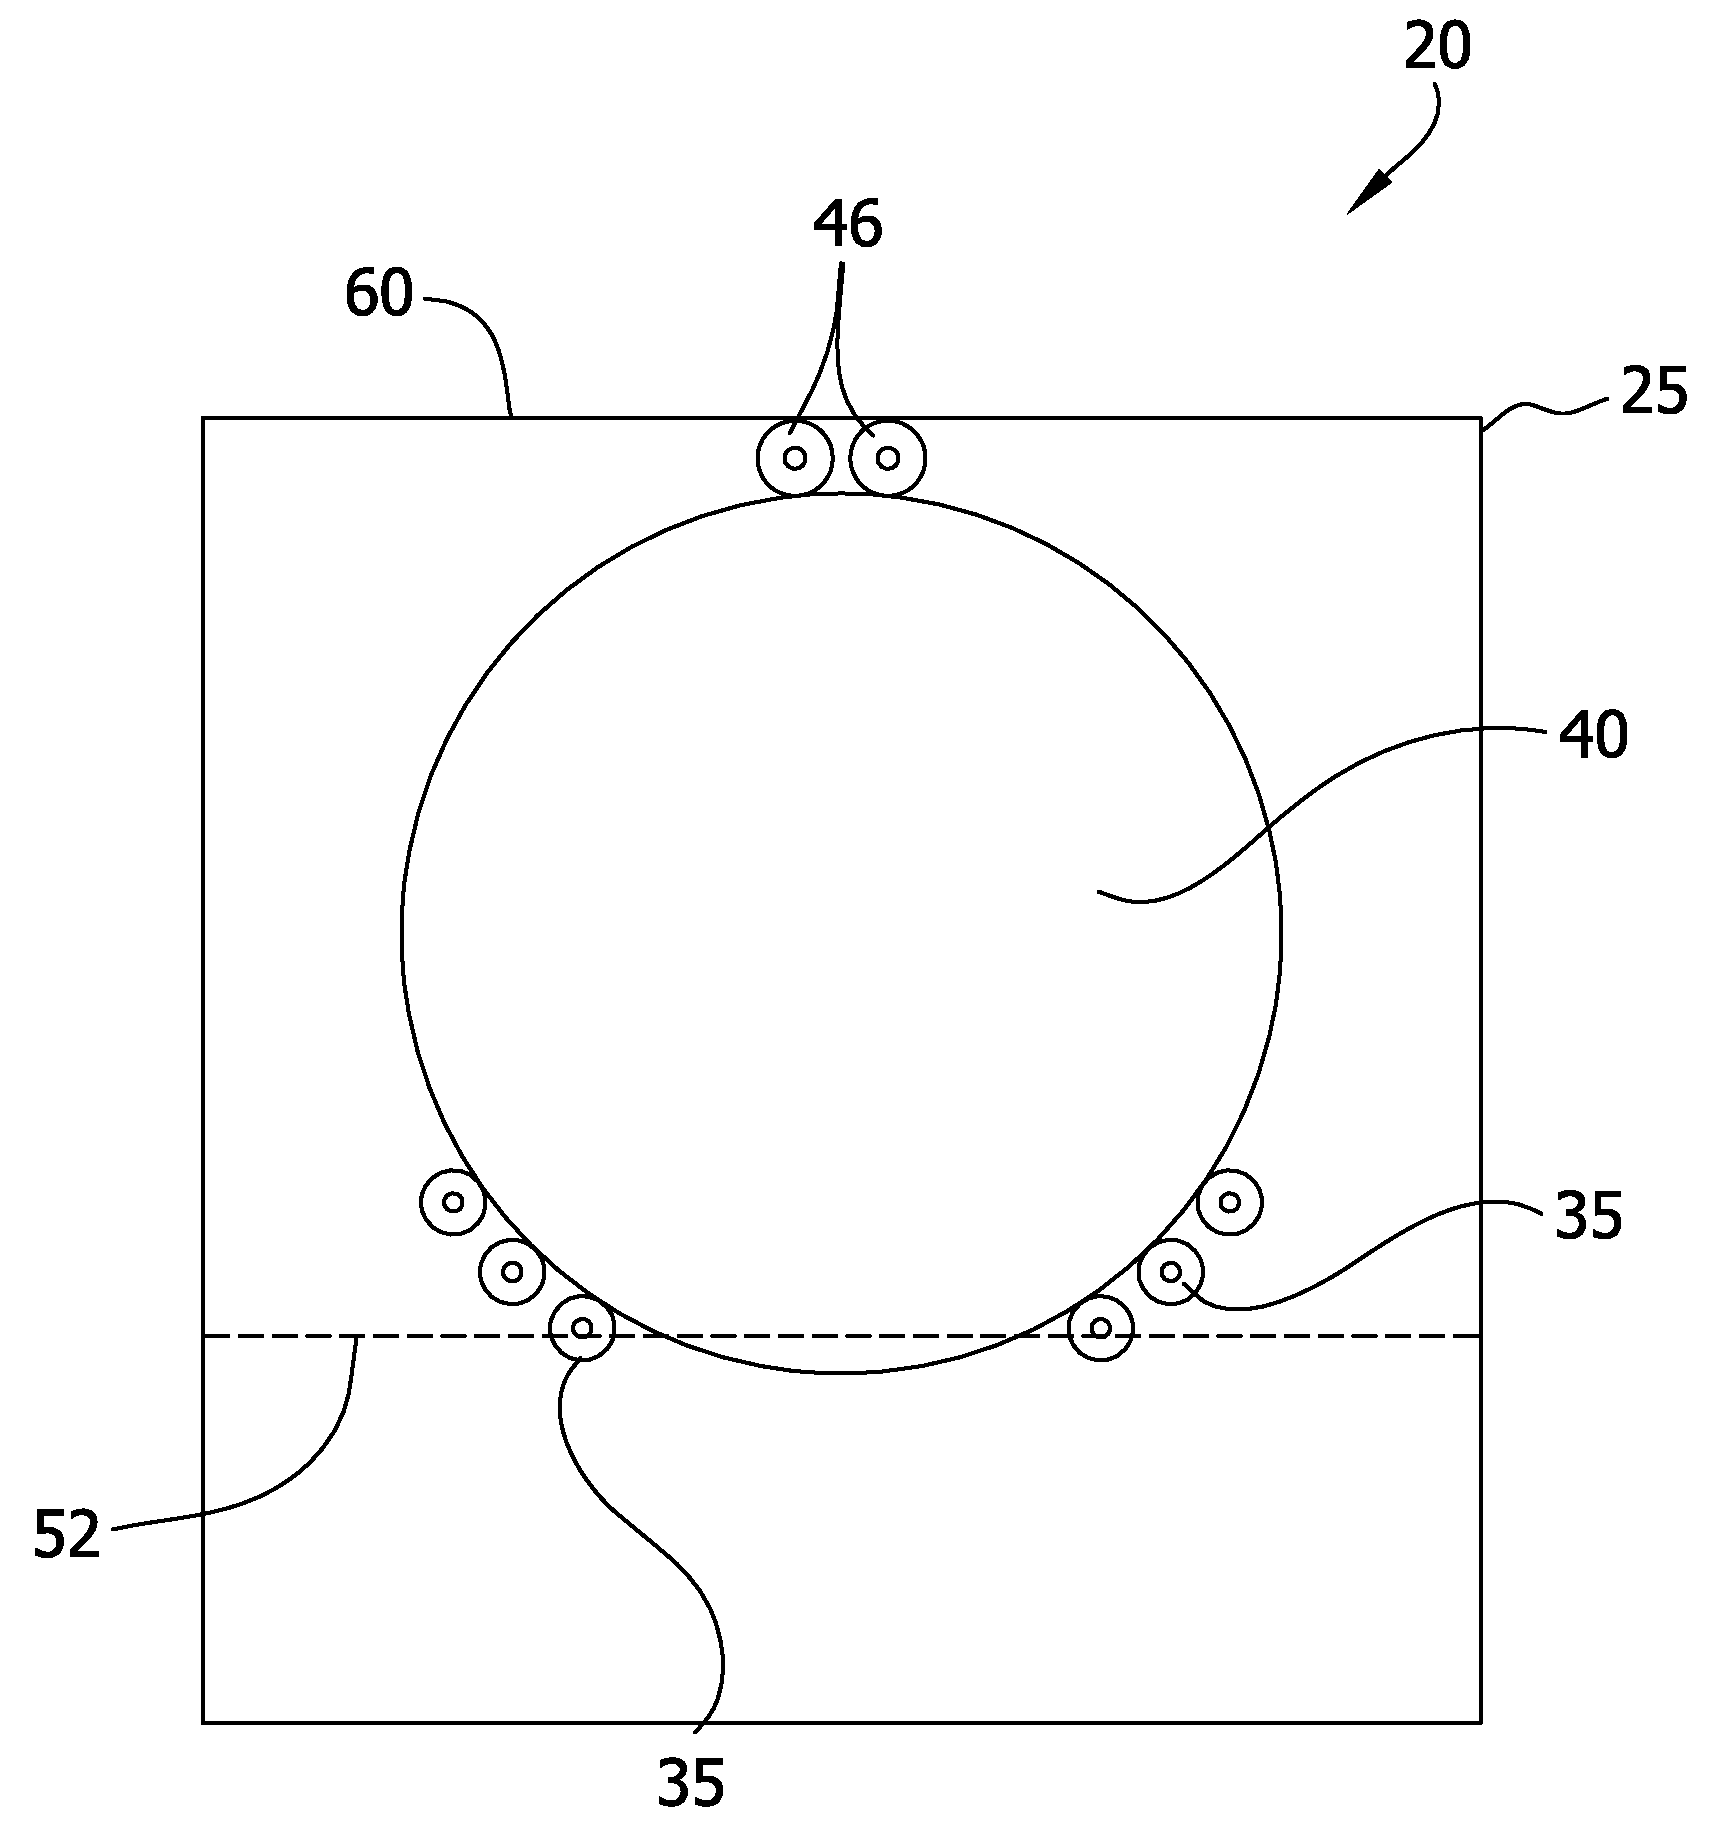 Edge etching apparatus for etching the edge of a silicon wafer